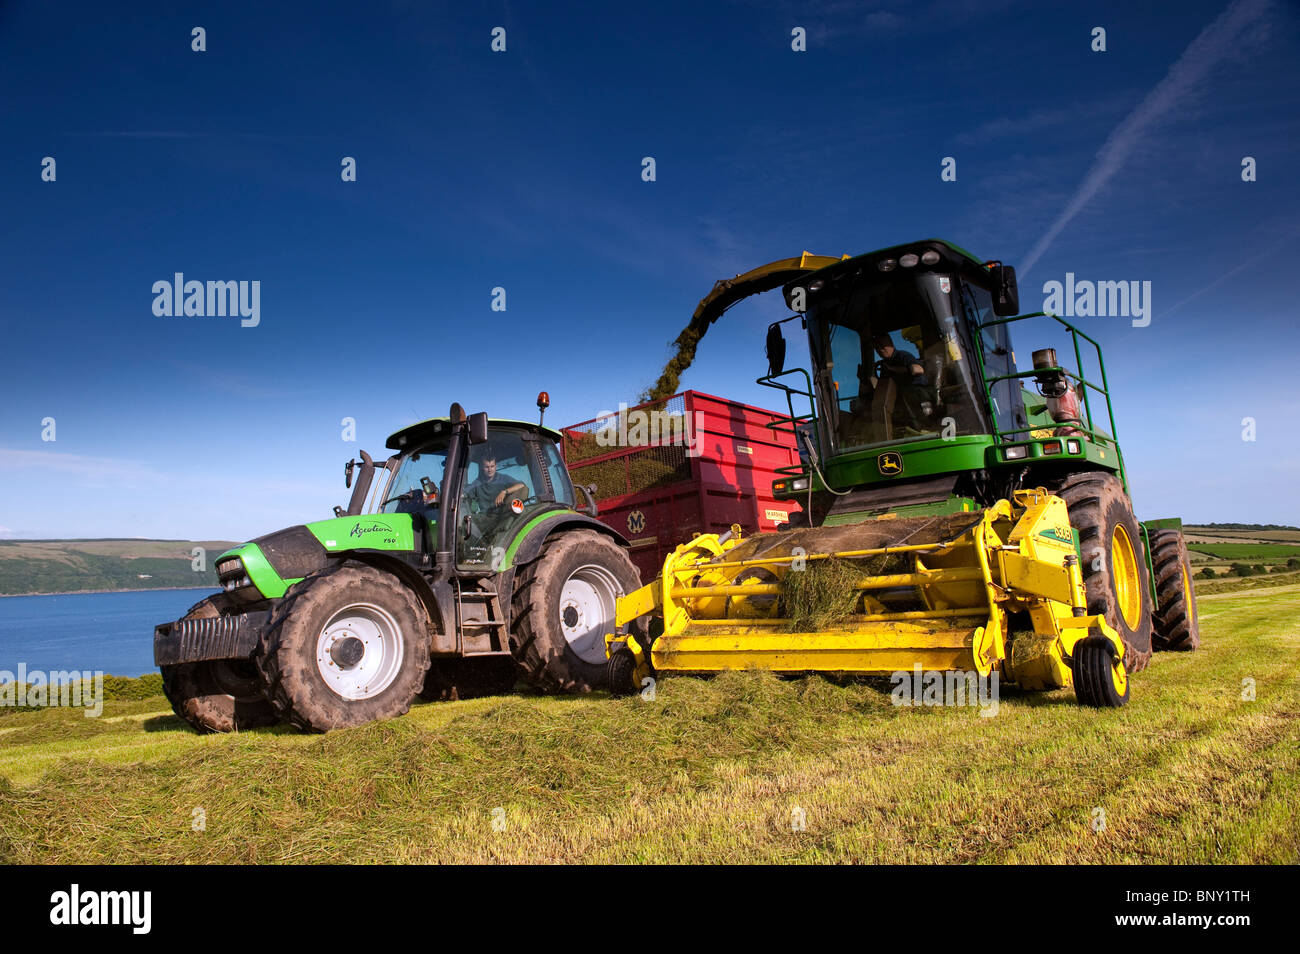 Silage making on the coast of Loch Ryan near Stranraer with Deutz Fahr tractor and John Deere chopper Stock Photo